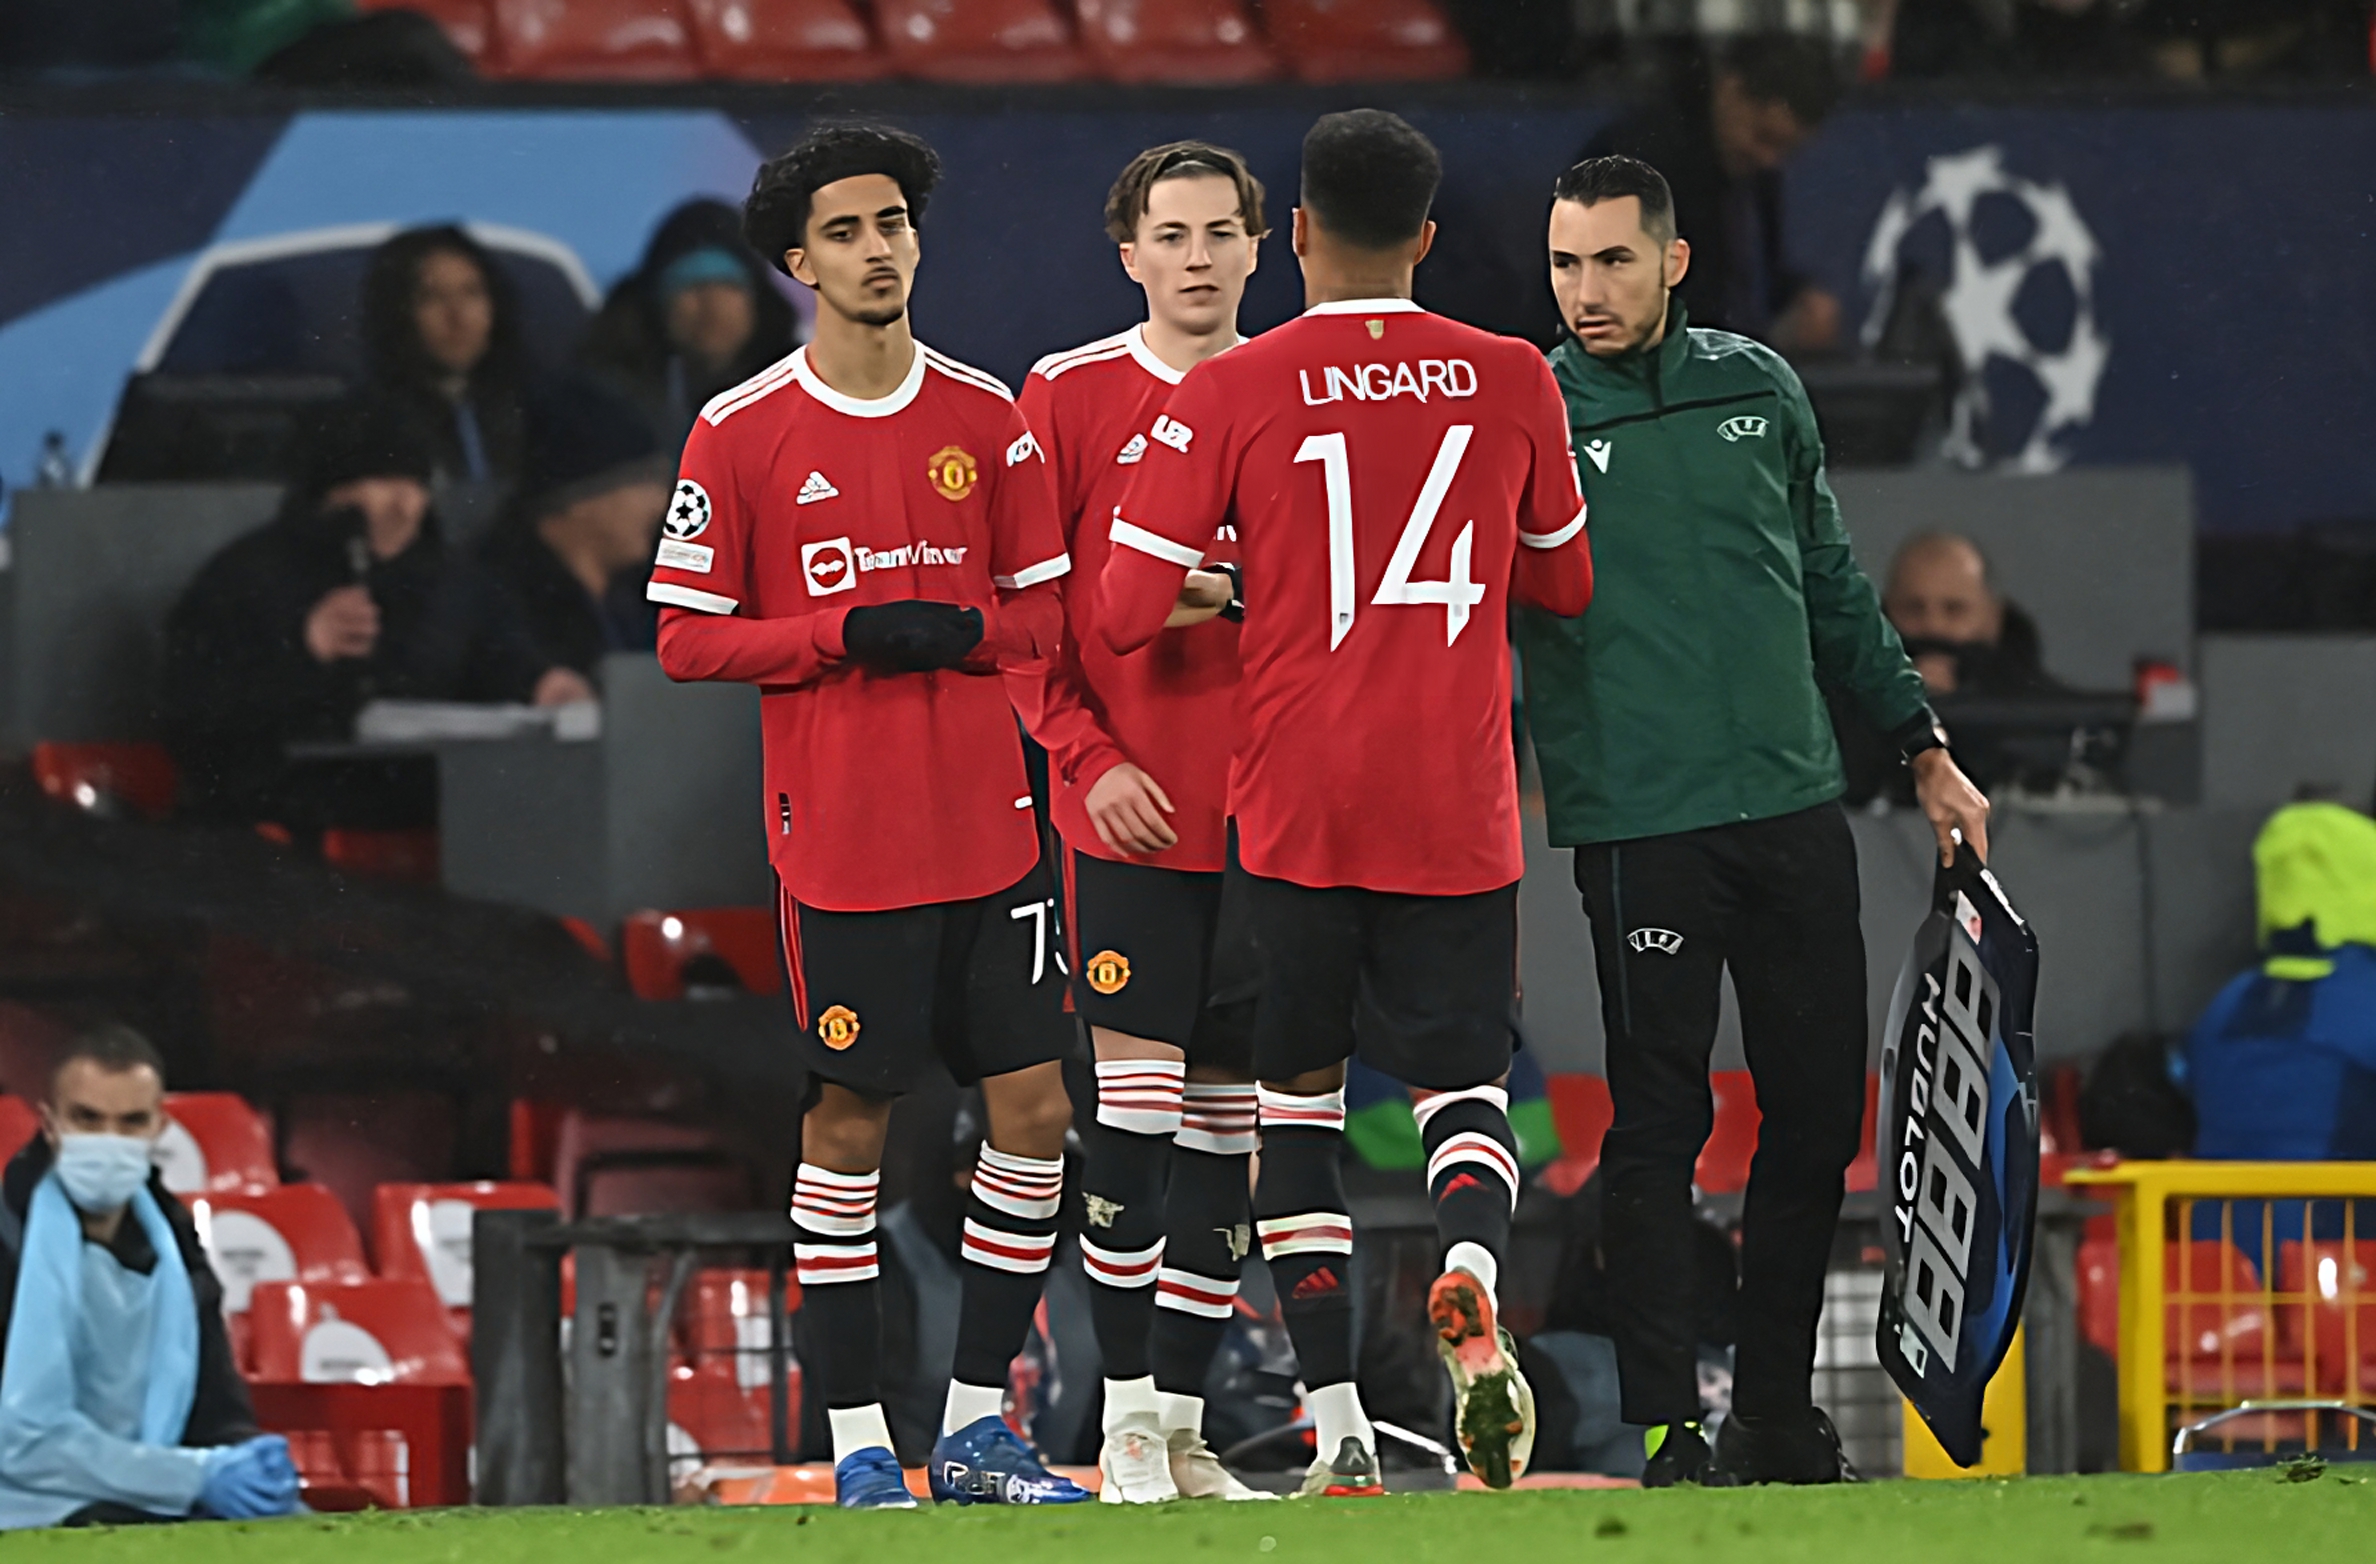 Manchester United youngster Charlie Savage awaits substitution ahead of his first-team debut